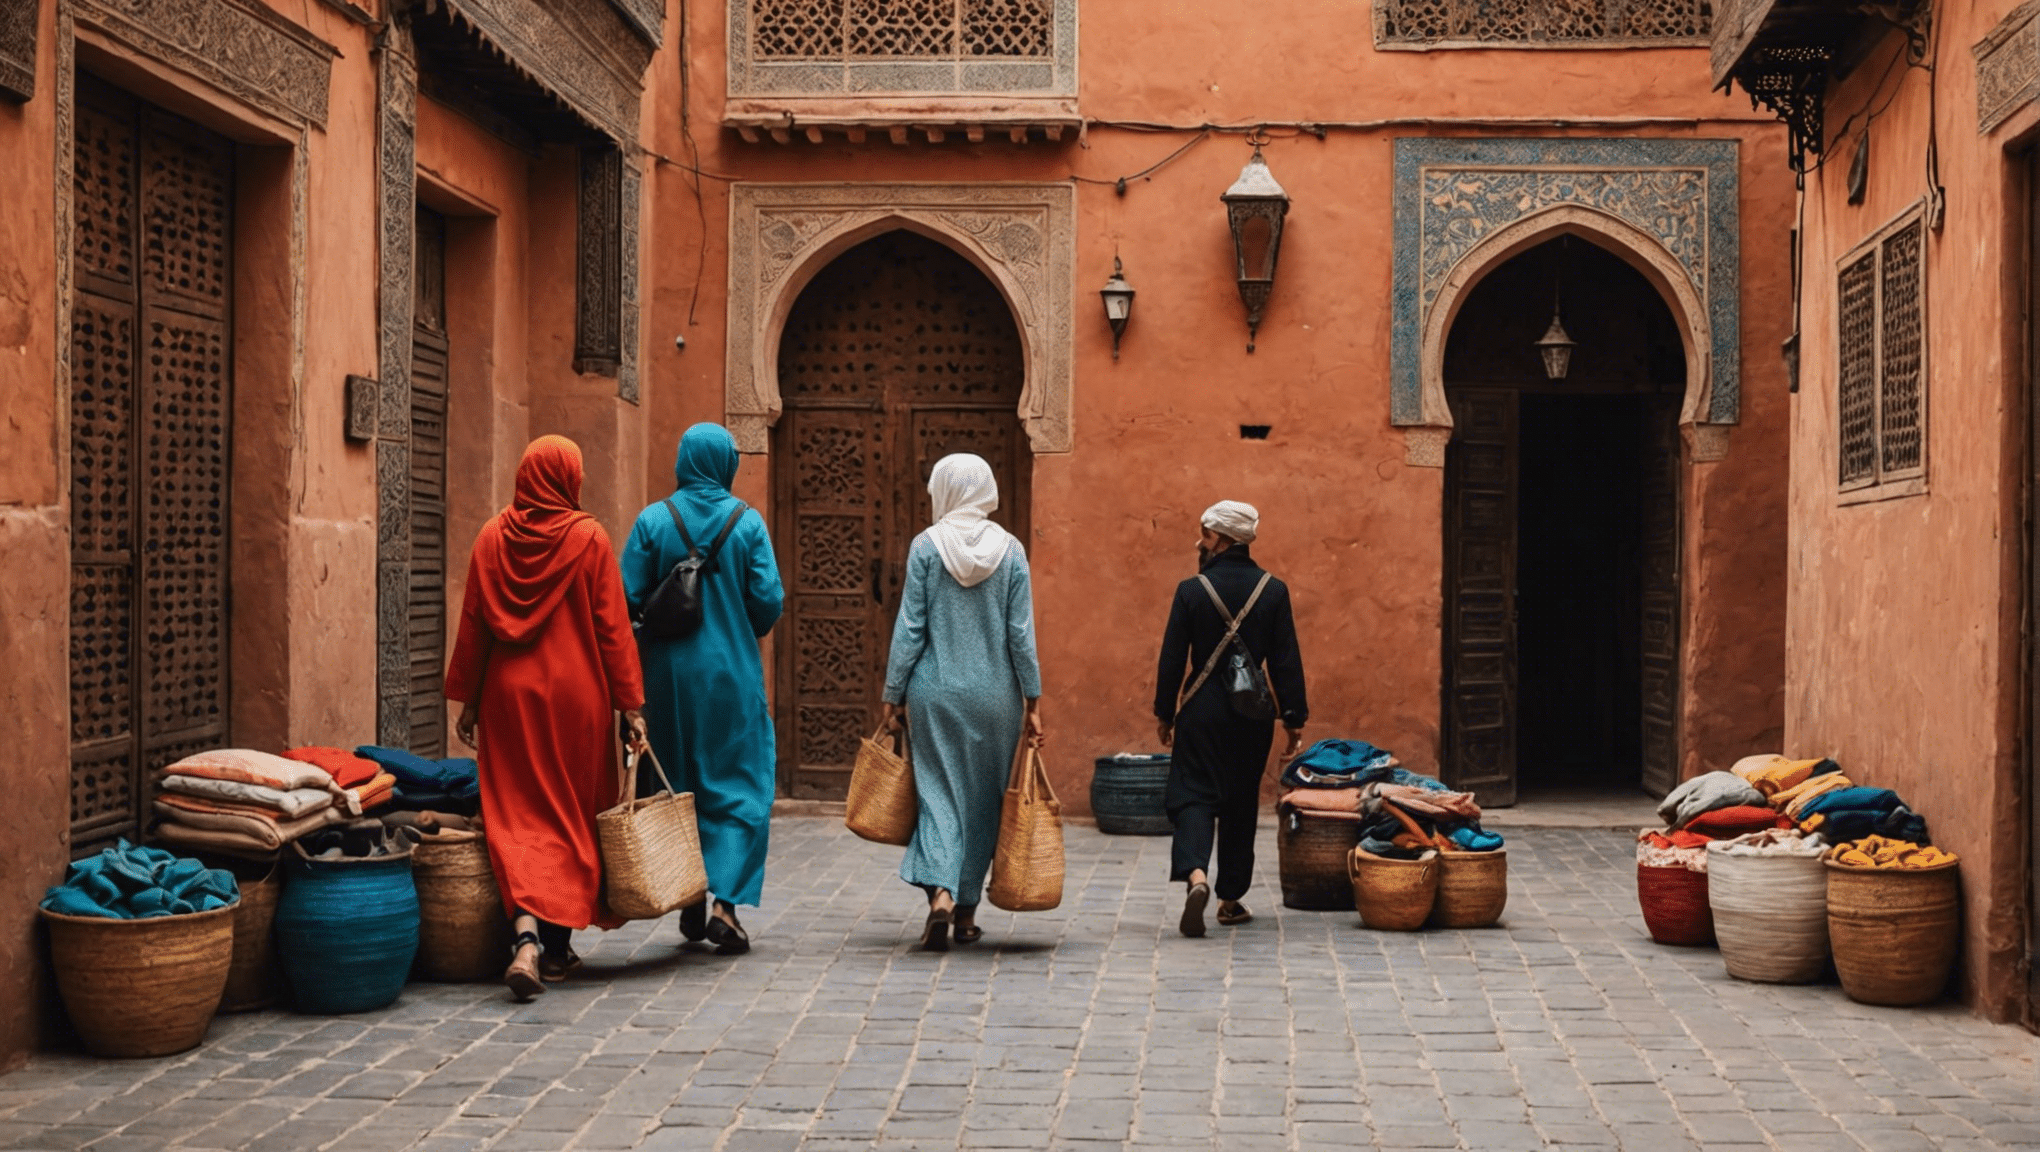 discover essential packing tips for an unforgettable april adventure in marrakech! from lightweight clothing to must-have accessories, make the most of your trip with our expert packing guide.